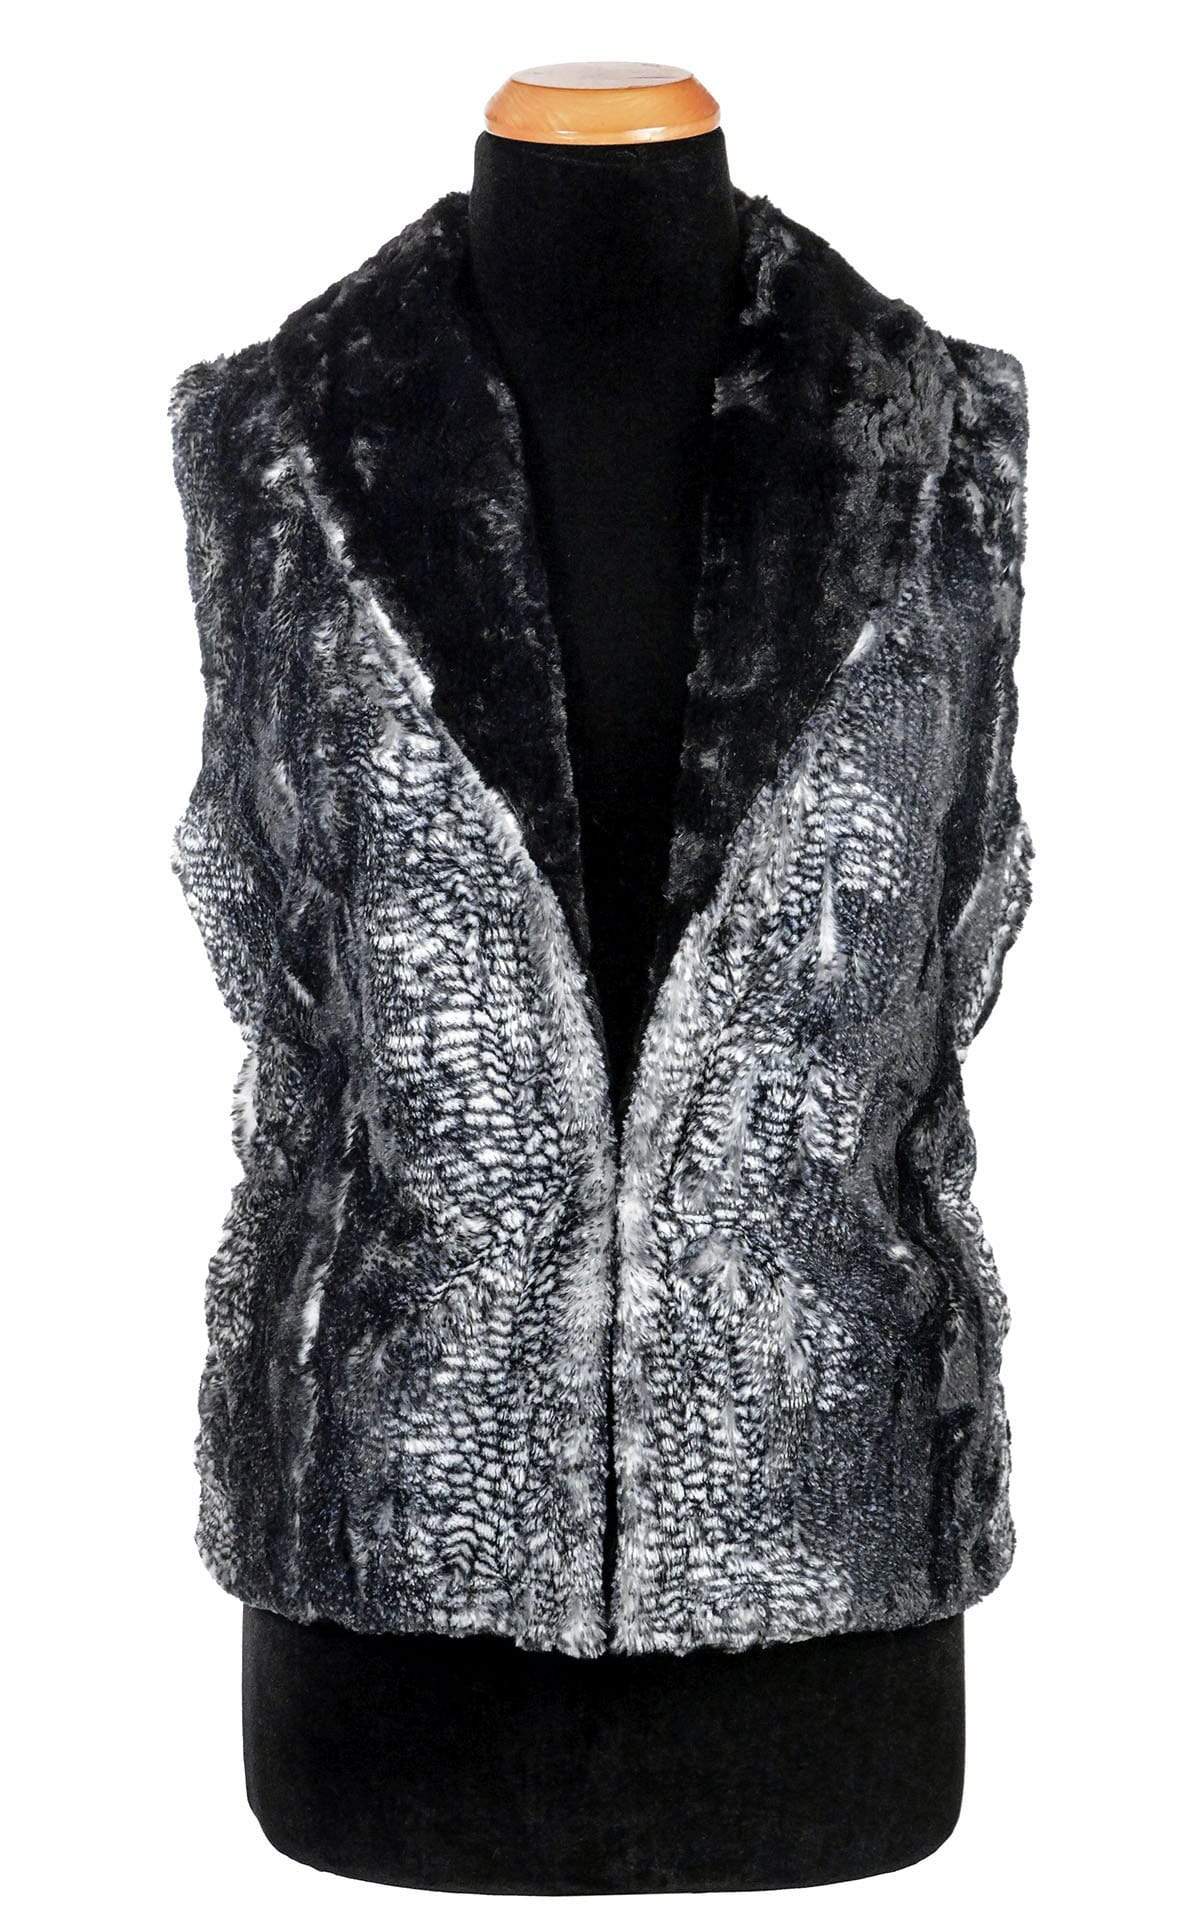 Shawl Collar Vest |  Black Mamba Black and White Faux Fur with Cuddly Faux Fur in Black | By Pandemonium Millinery | Seattle WA USA